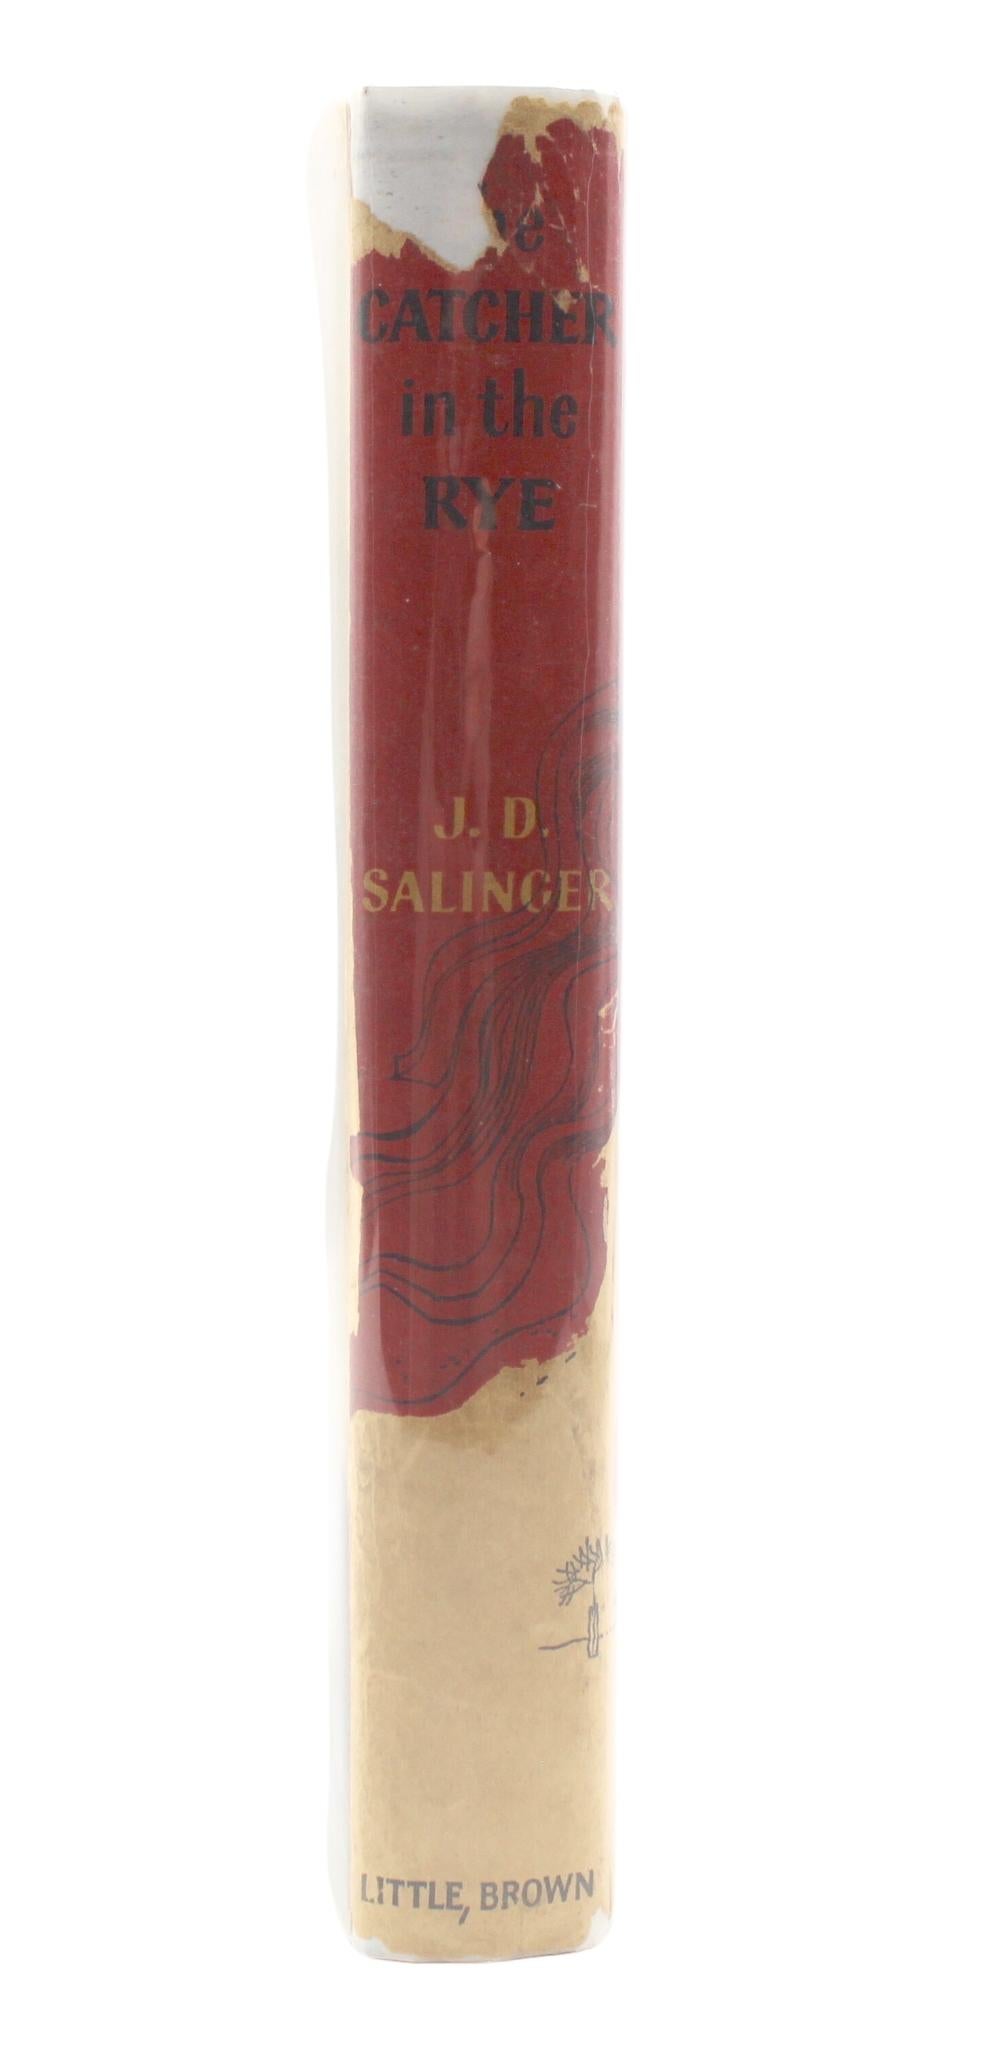 Paper Catcher in the Rye by J.D. Salinger, First Edition, in Dust Jacket, 1951